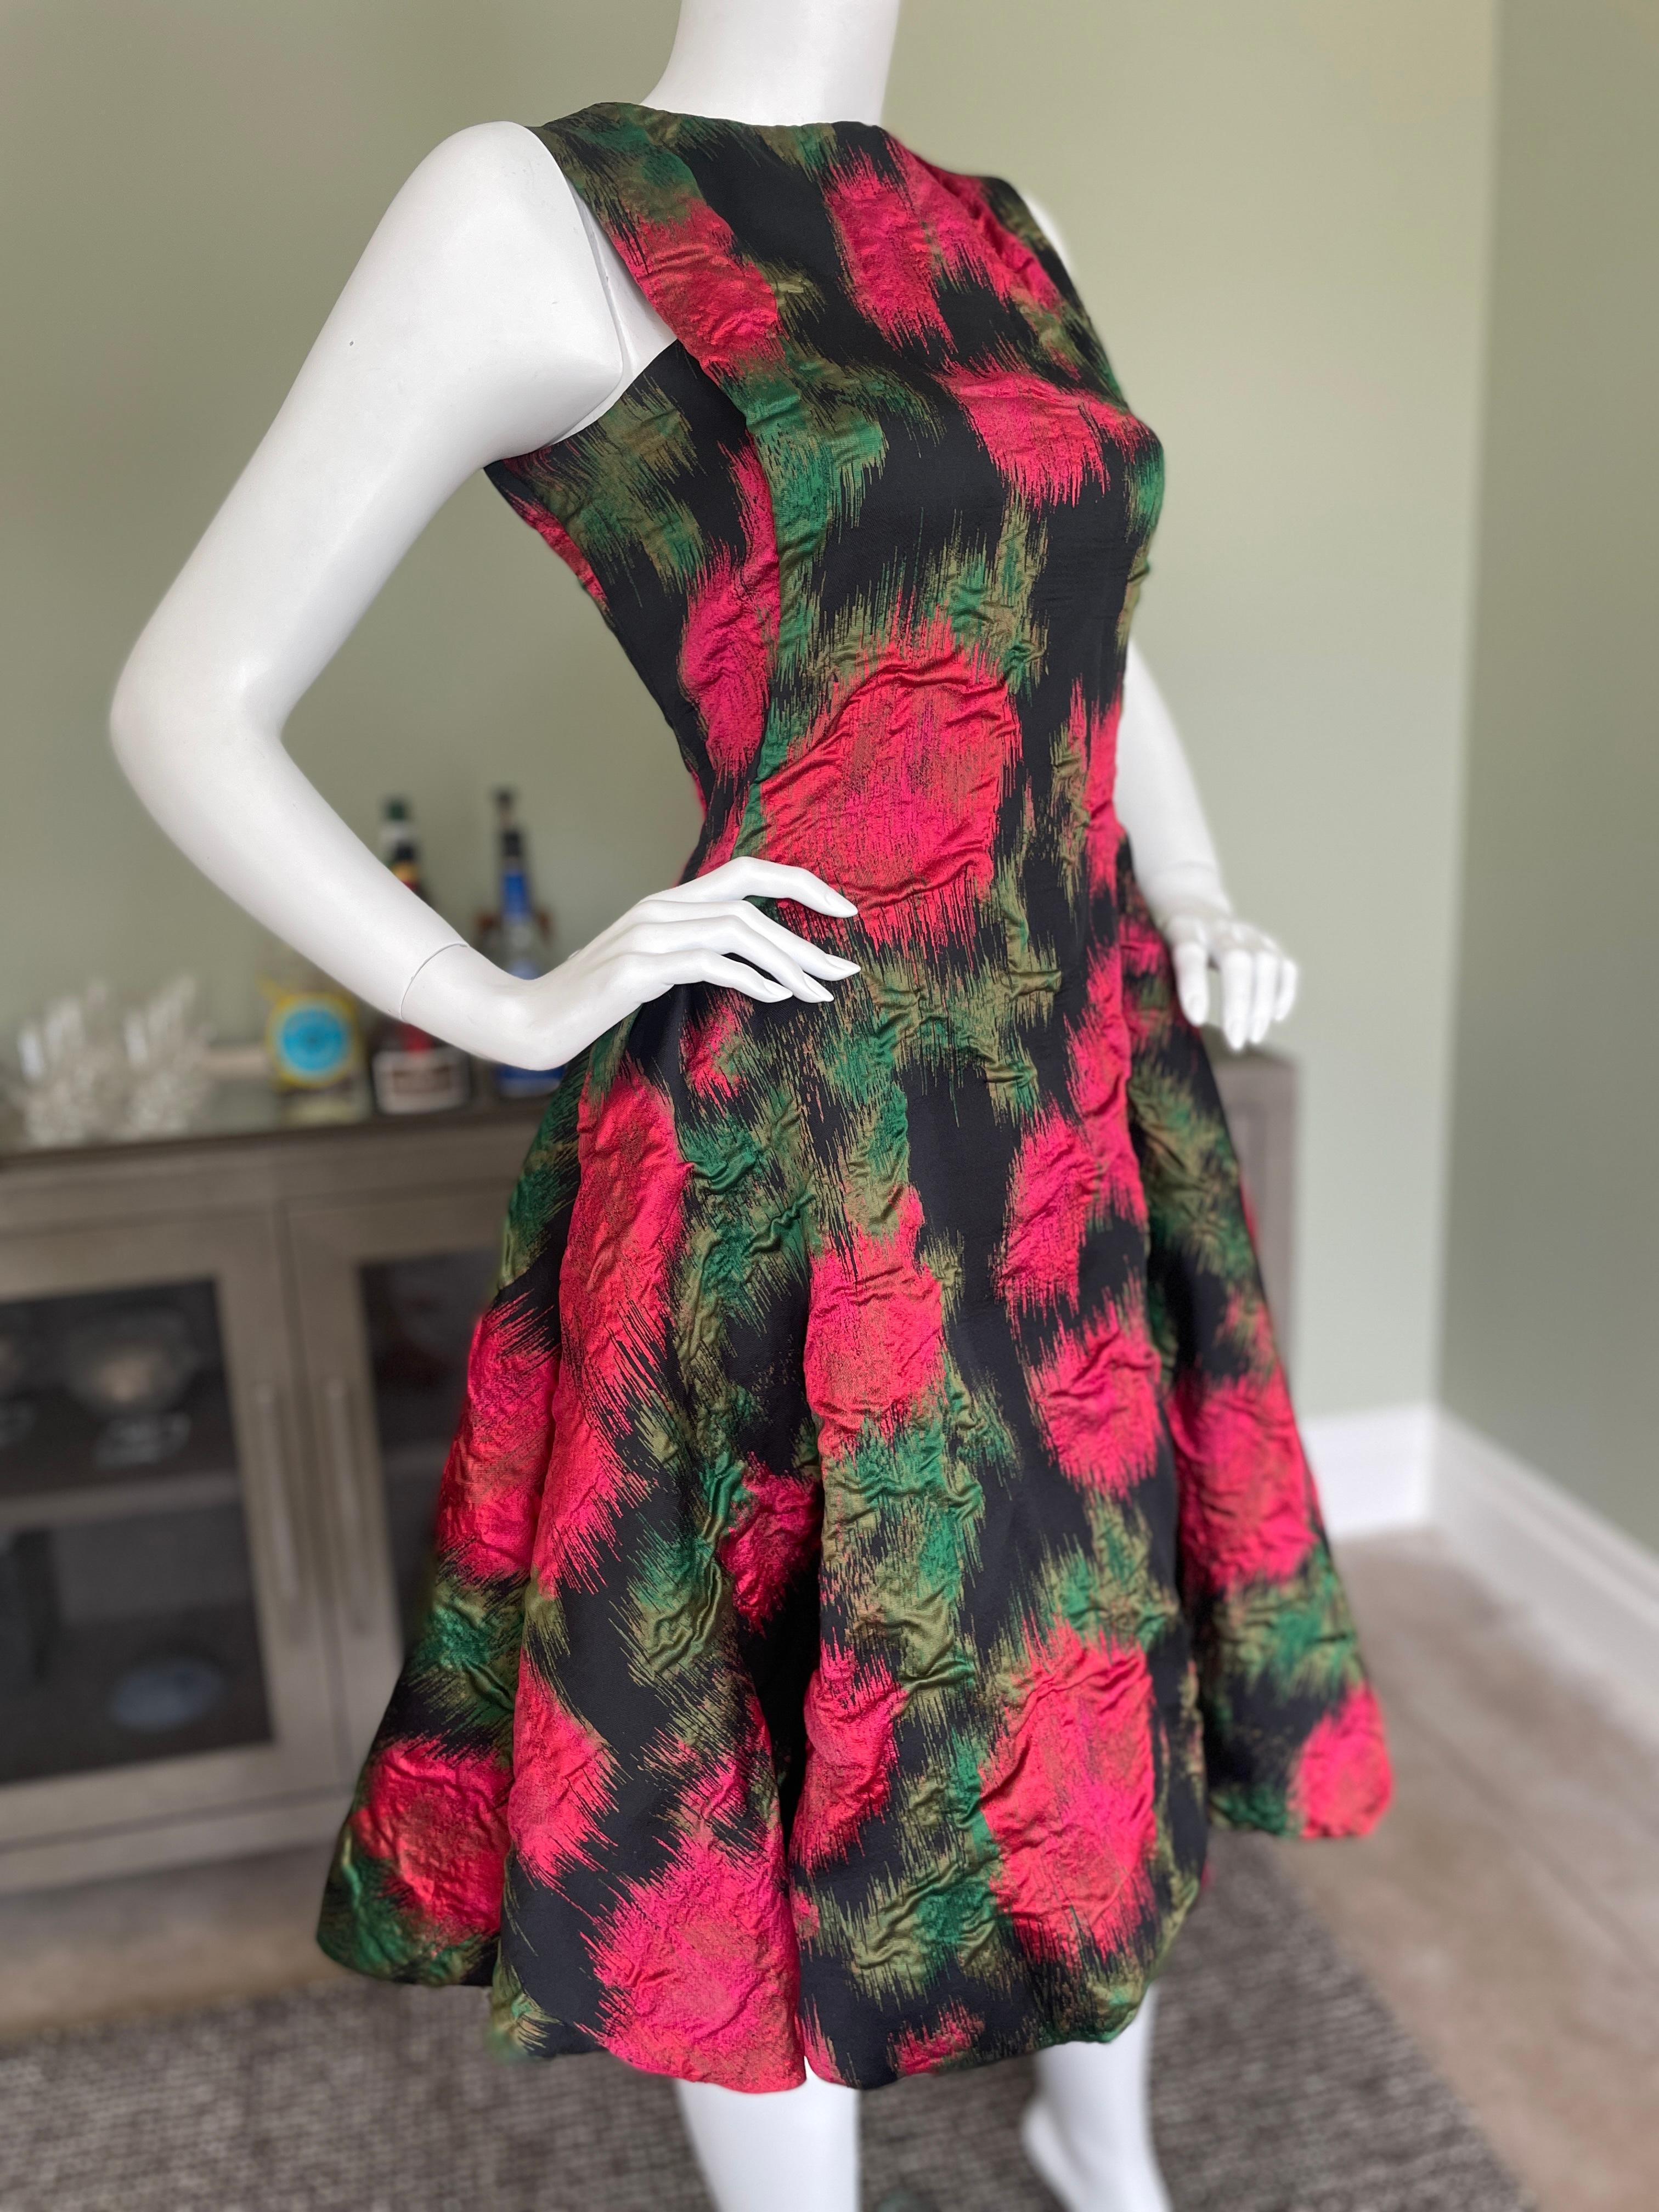 Lanvin by Alber Elbaz Textural Sleeveless Floral Print Cocktail Dress In Excellent Condition For Sale In Cloverdale, CA